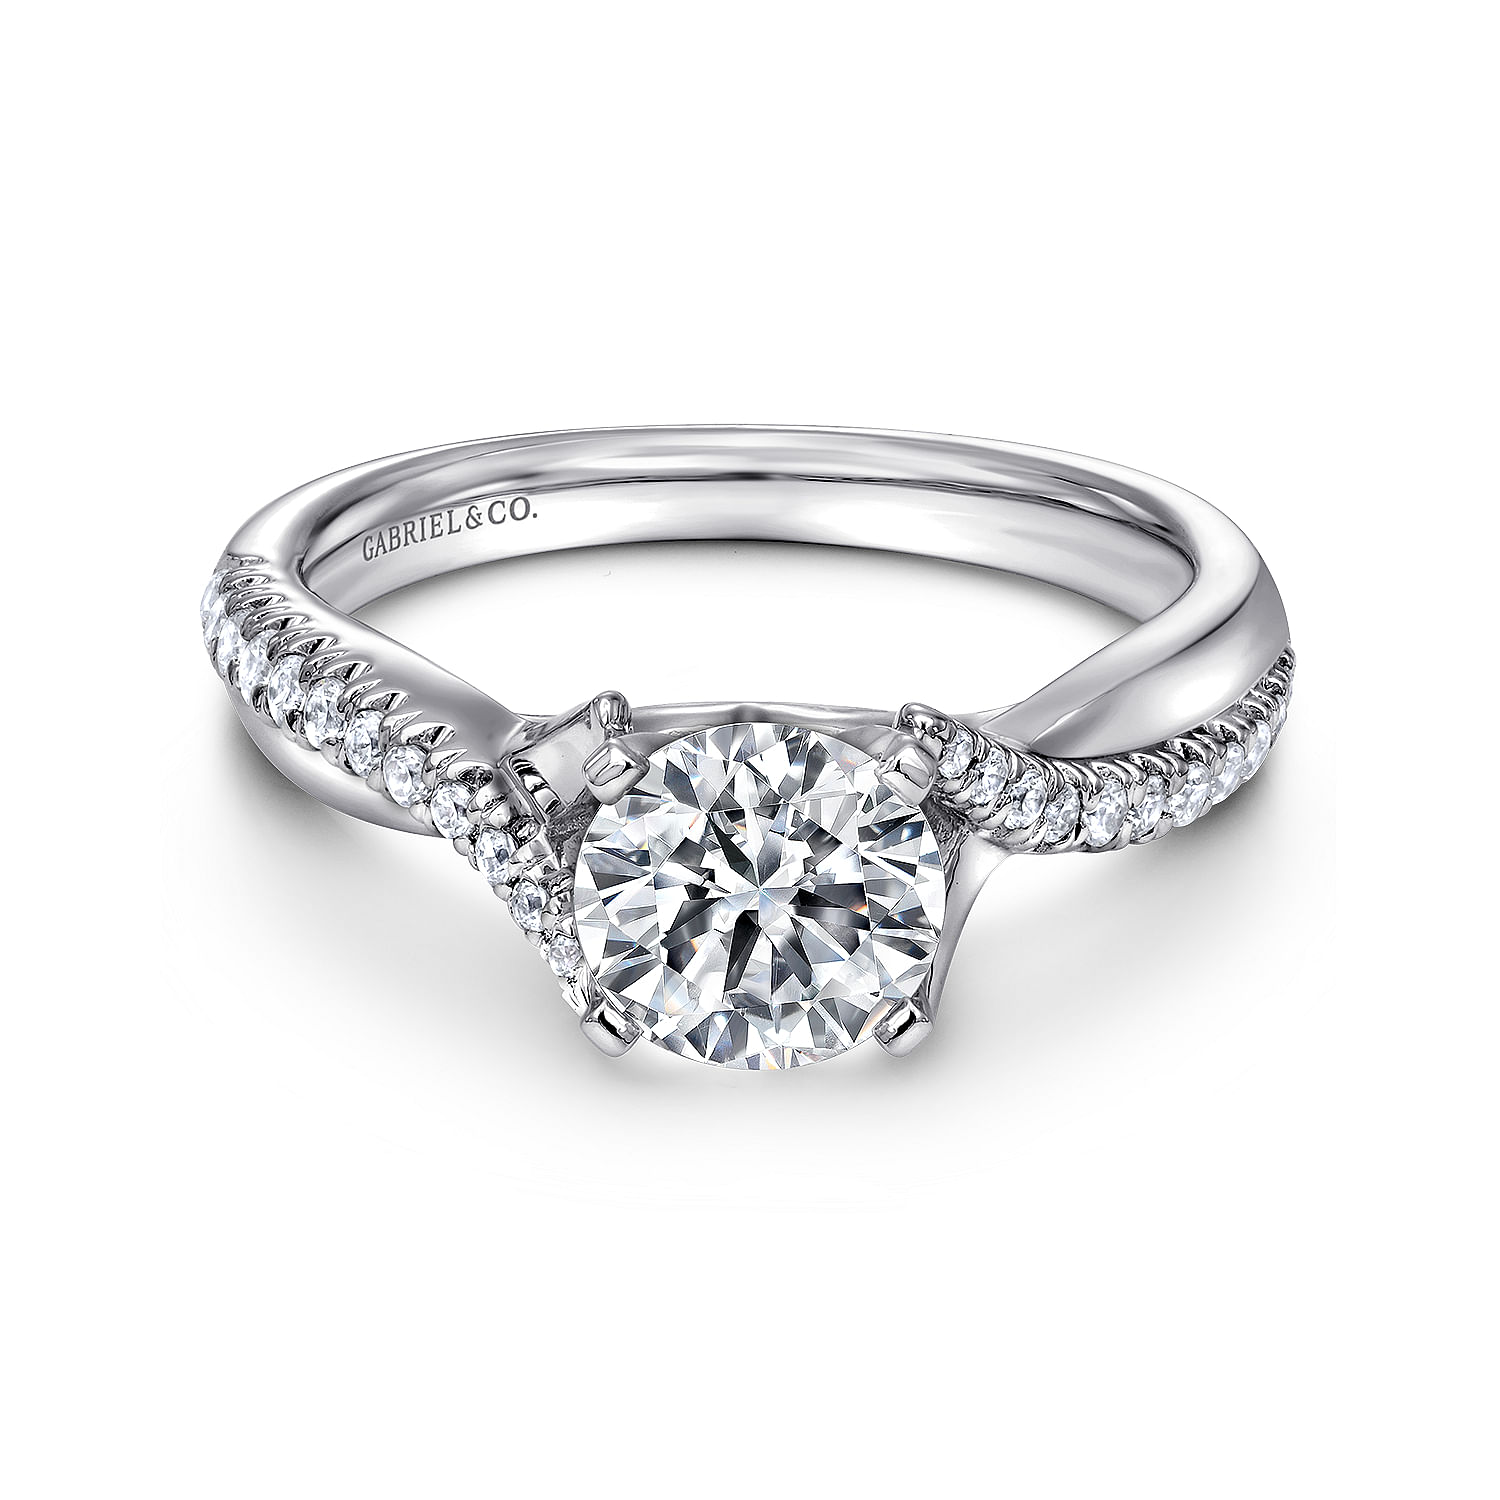 Scout - 14K White Gold Round Twisted Diamond Engagement Ring